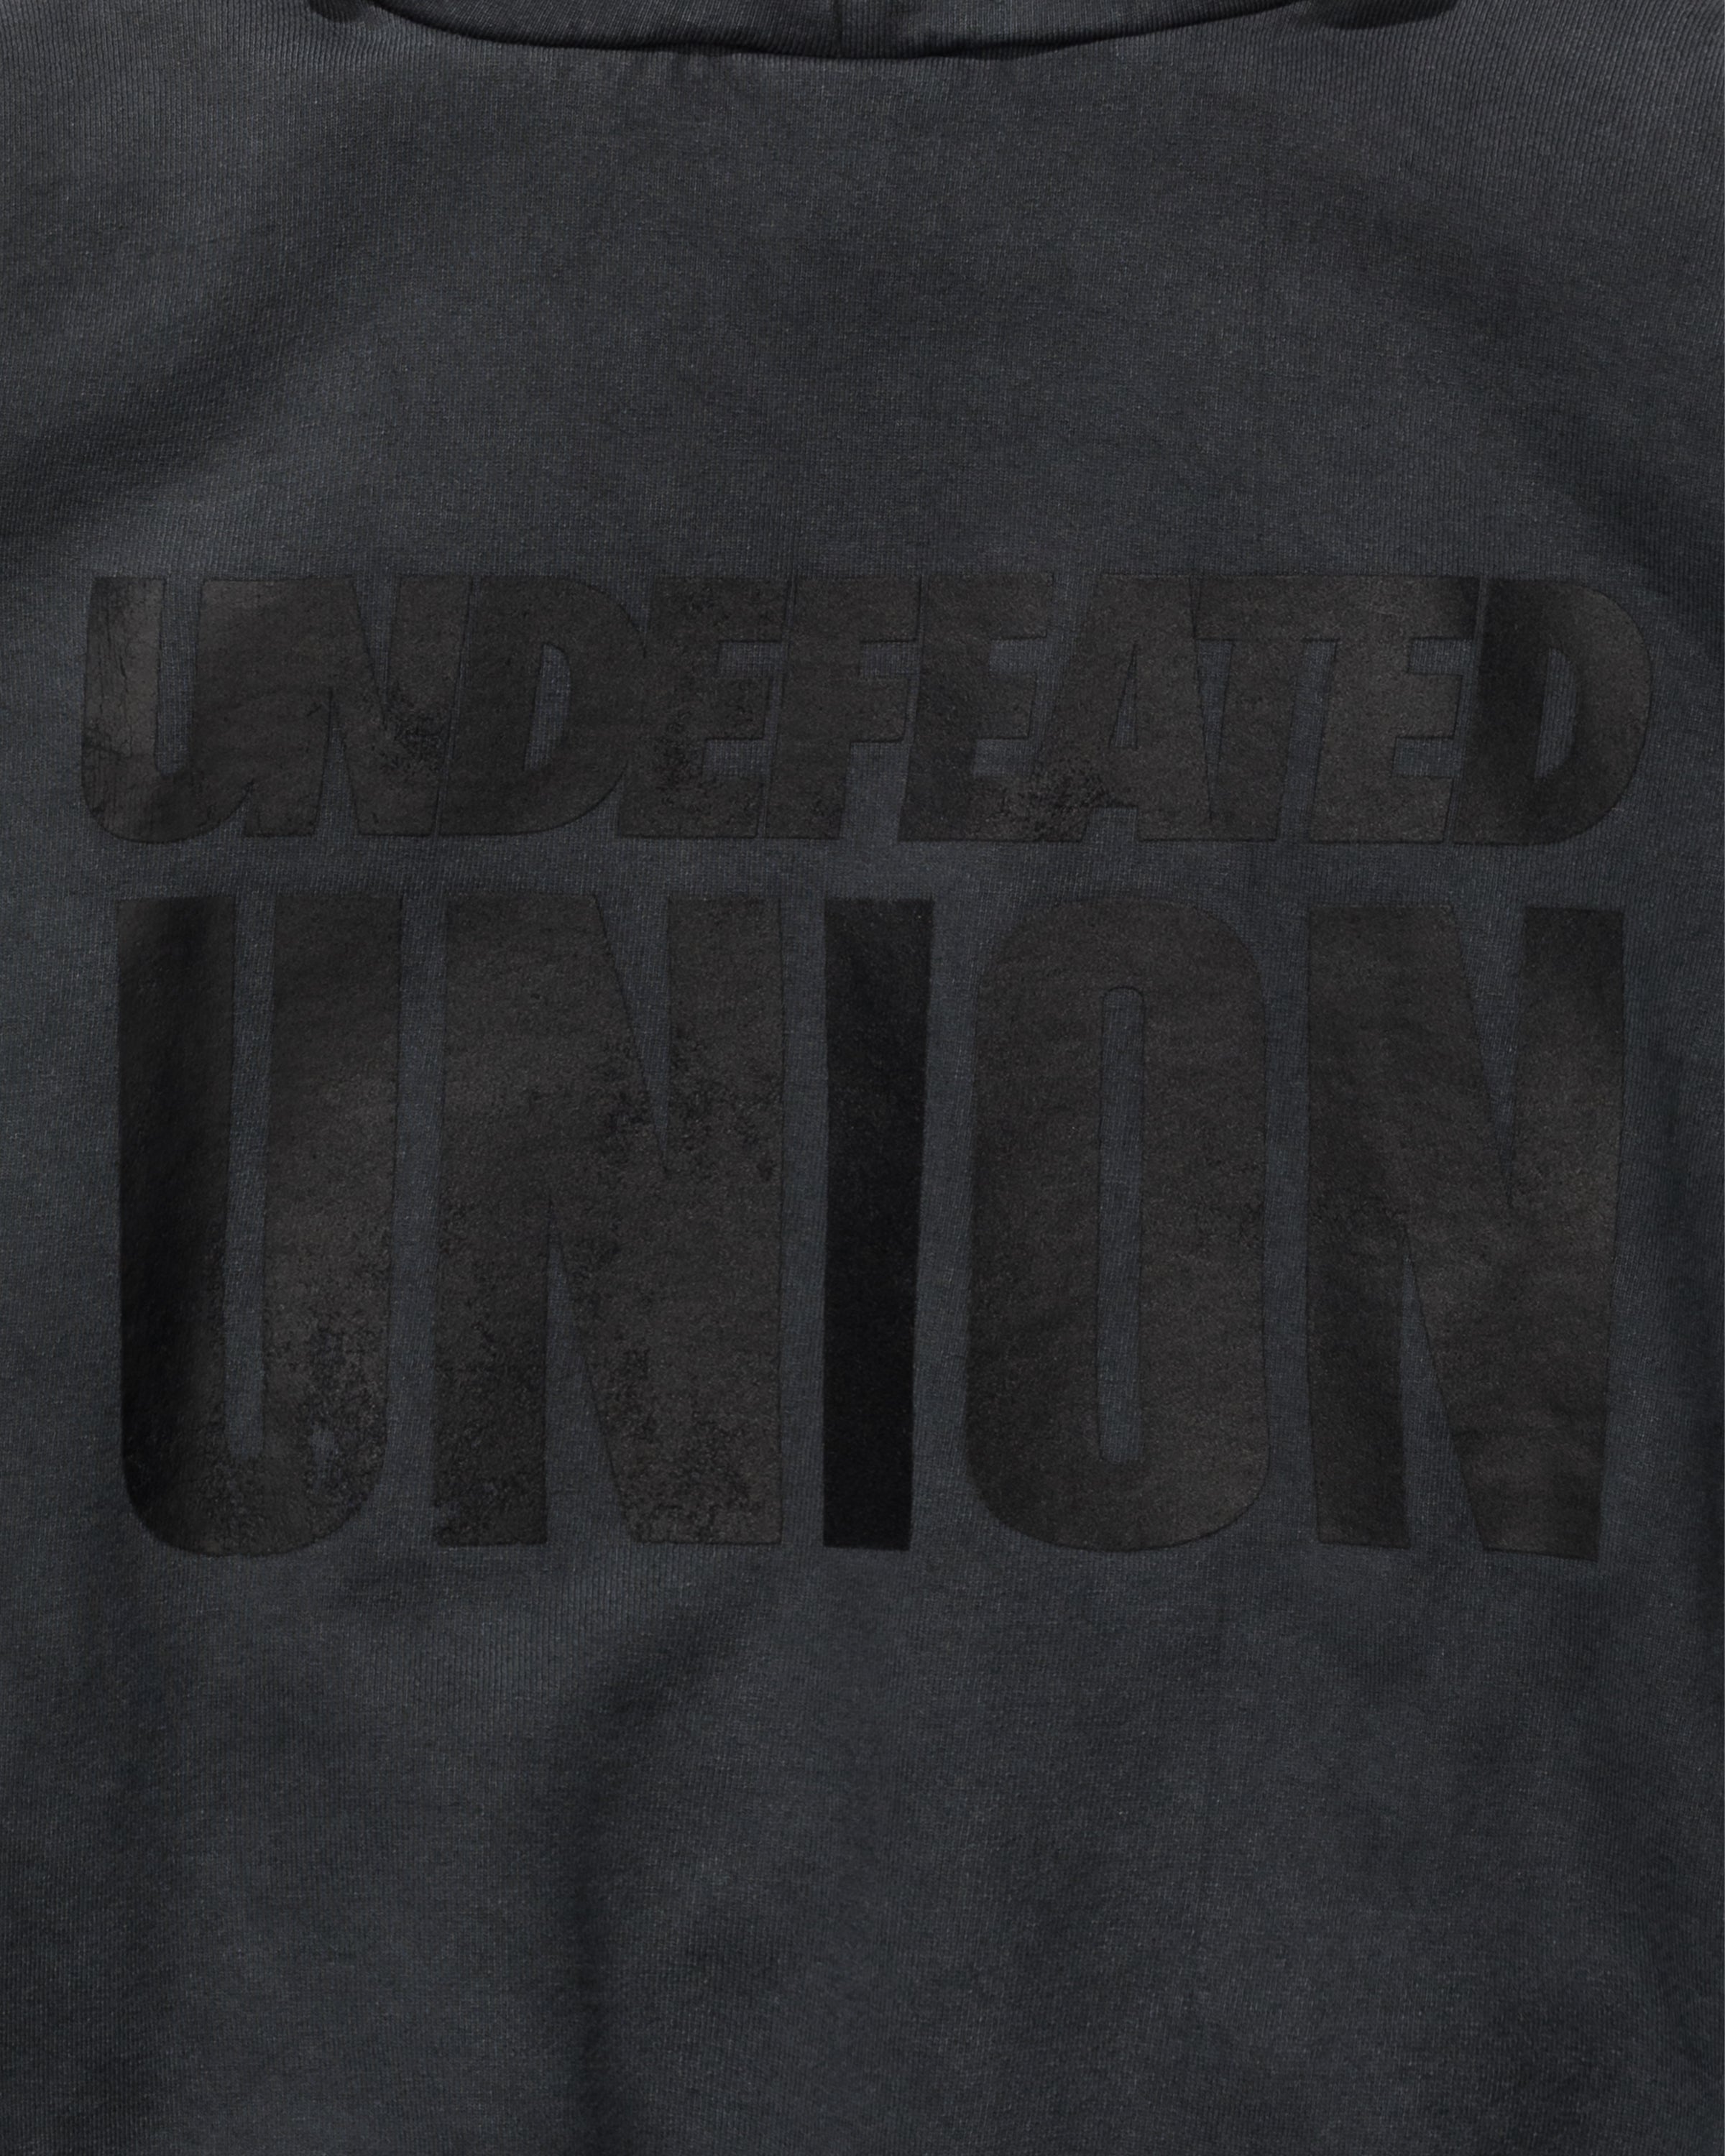 UNDEFEATED X UNION HOODIE - BLACK